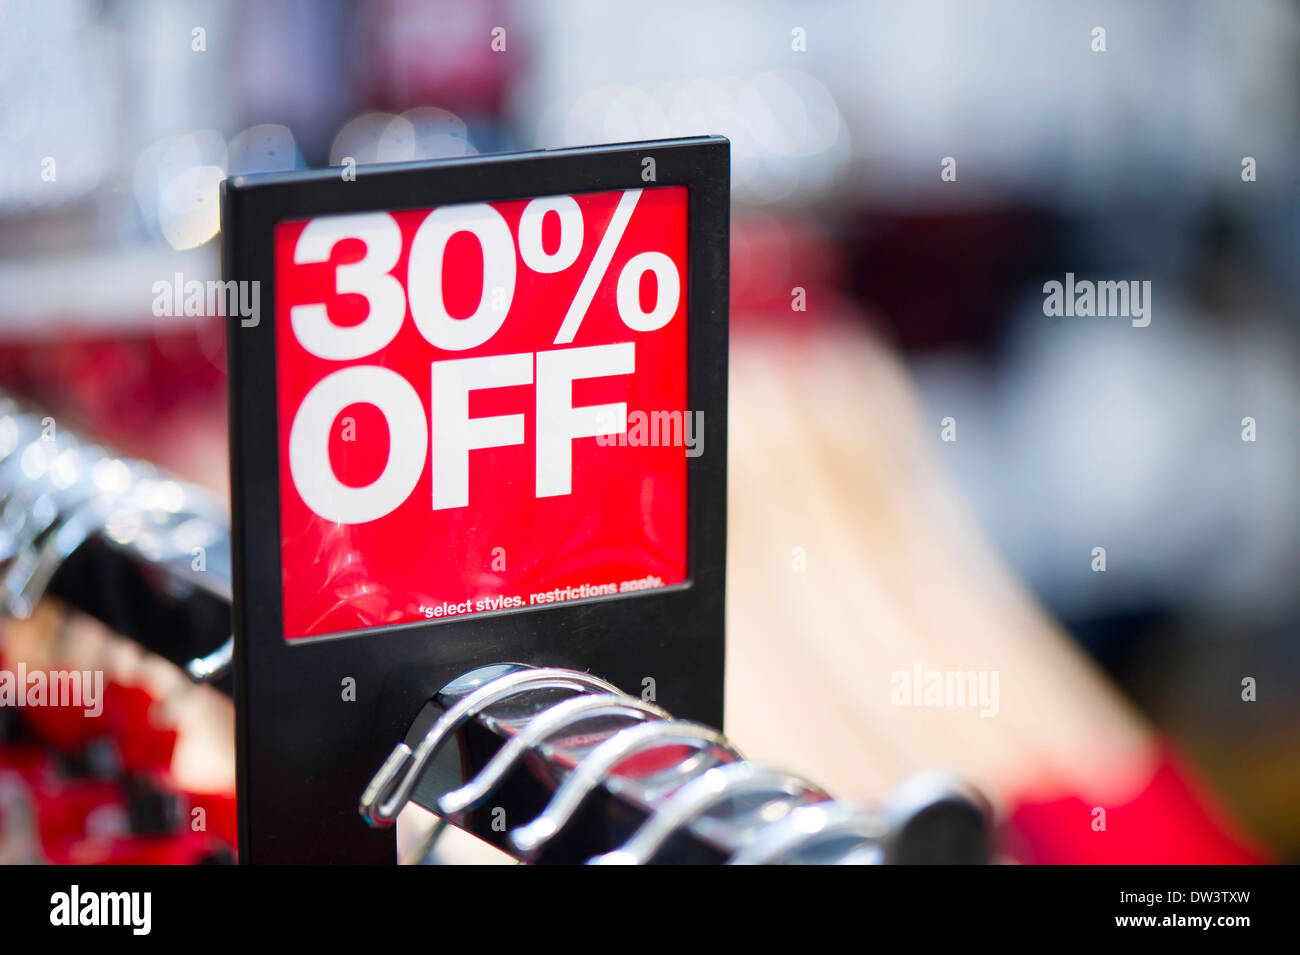 A 30% off sale sign in a clothing retail store on Black Friday. Stock Photo